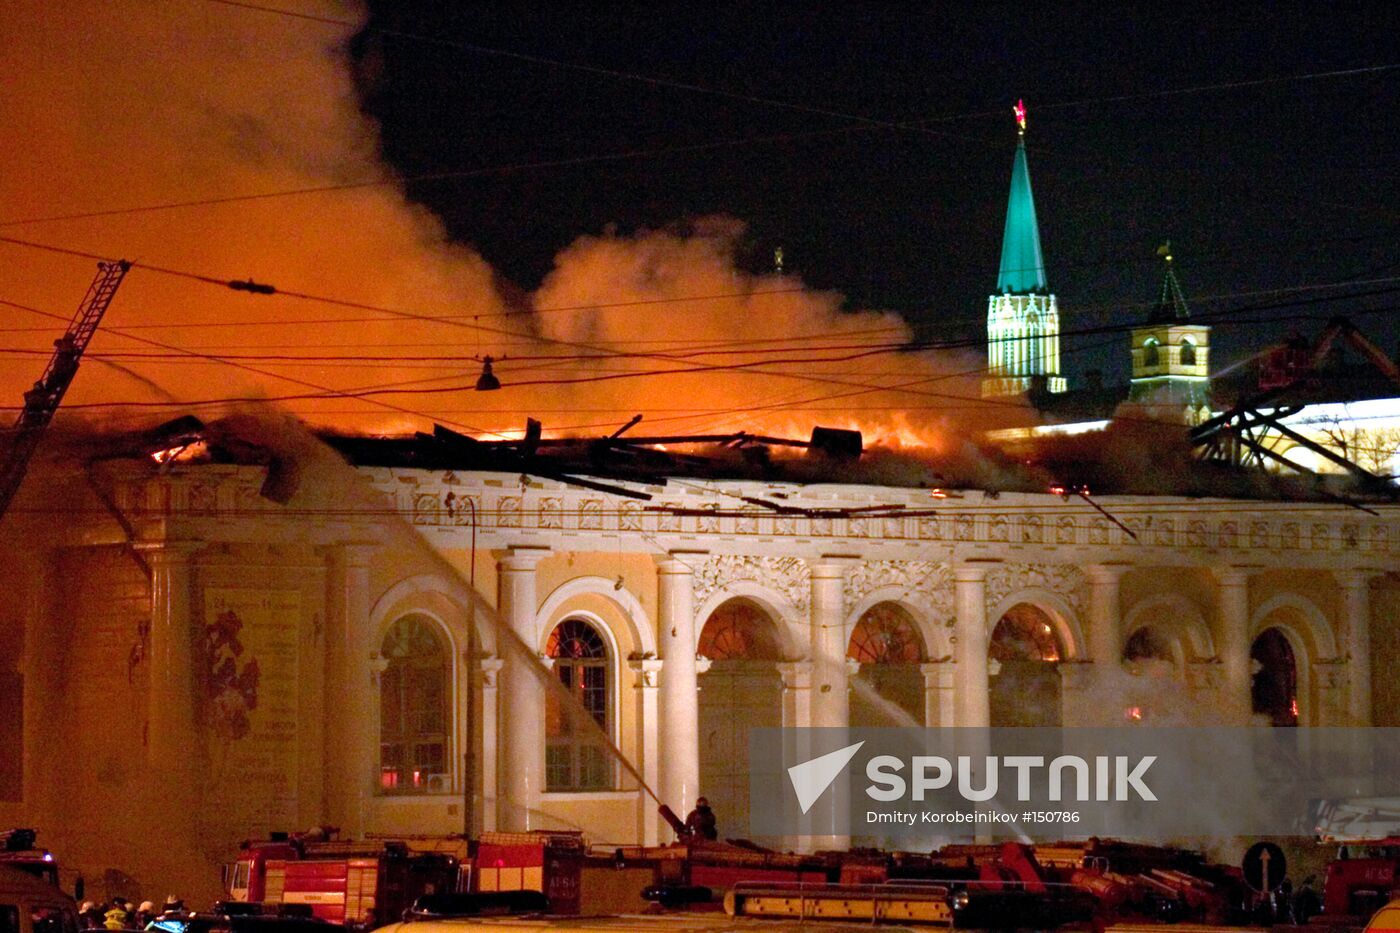 MOSCOW MANEZH FIRE